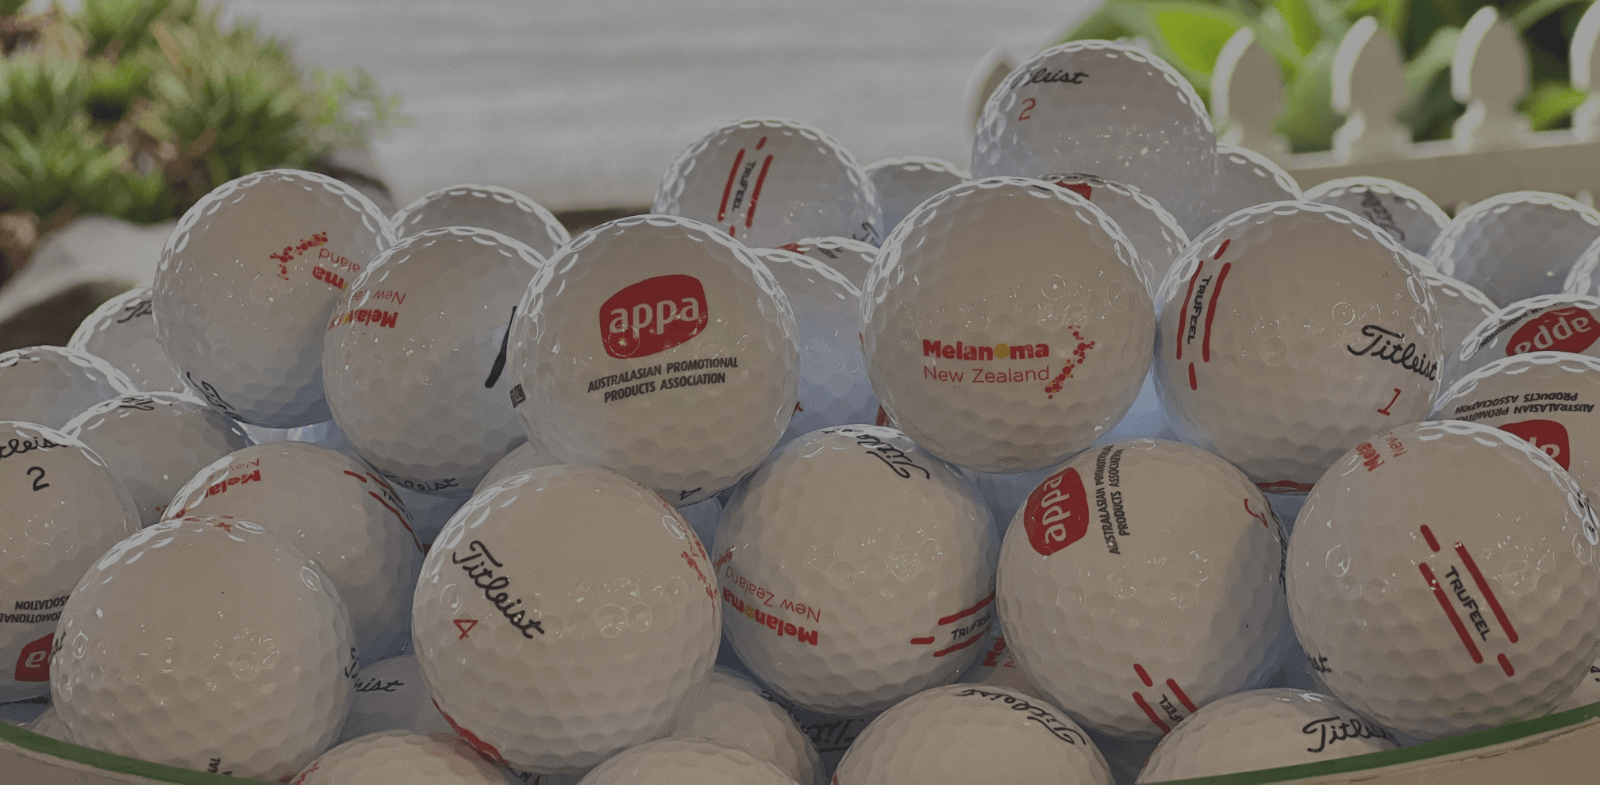 Marketers tee off for a worthy cause at The Keith Norris Charity Cup